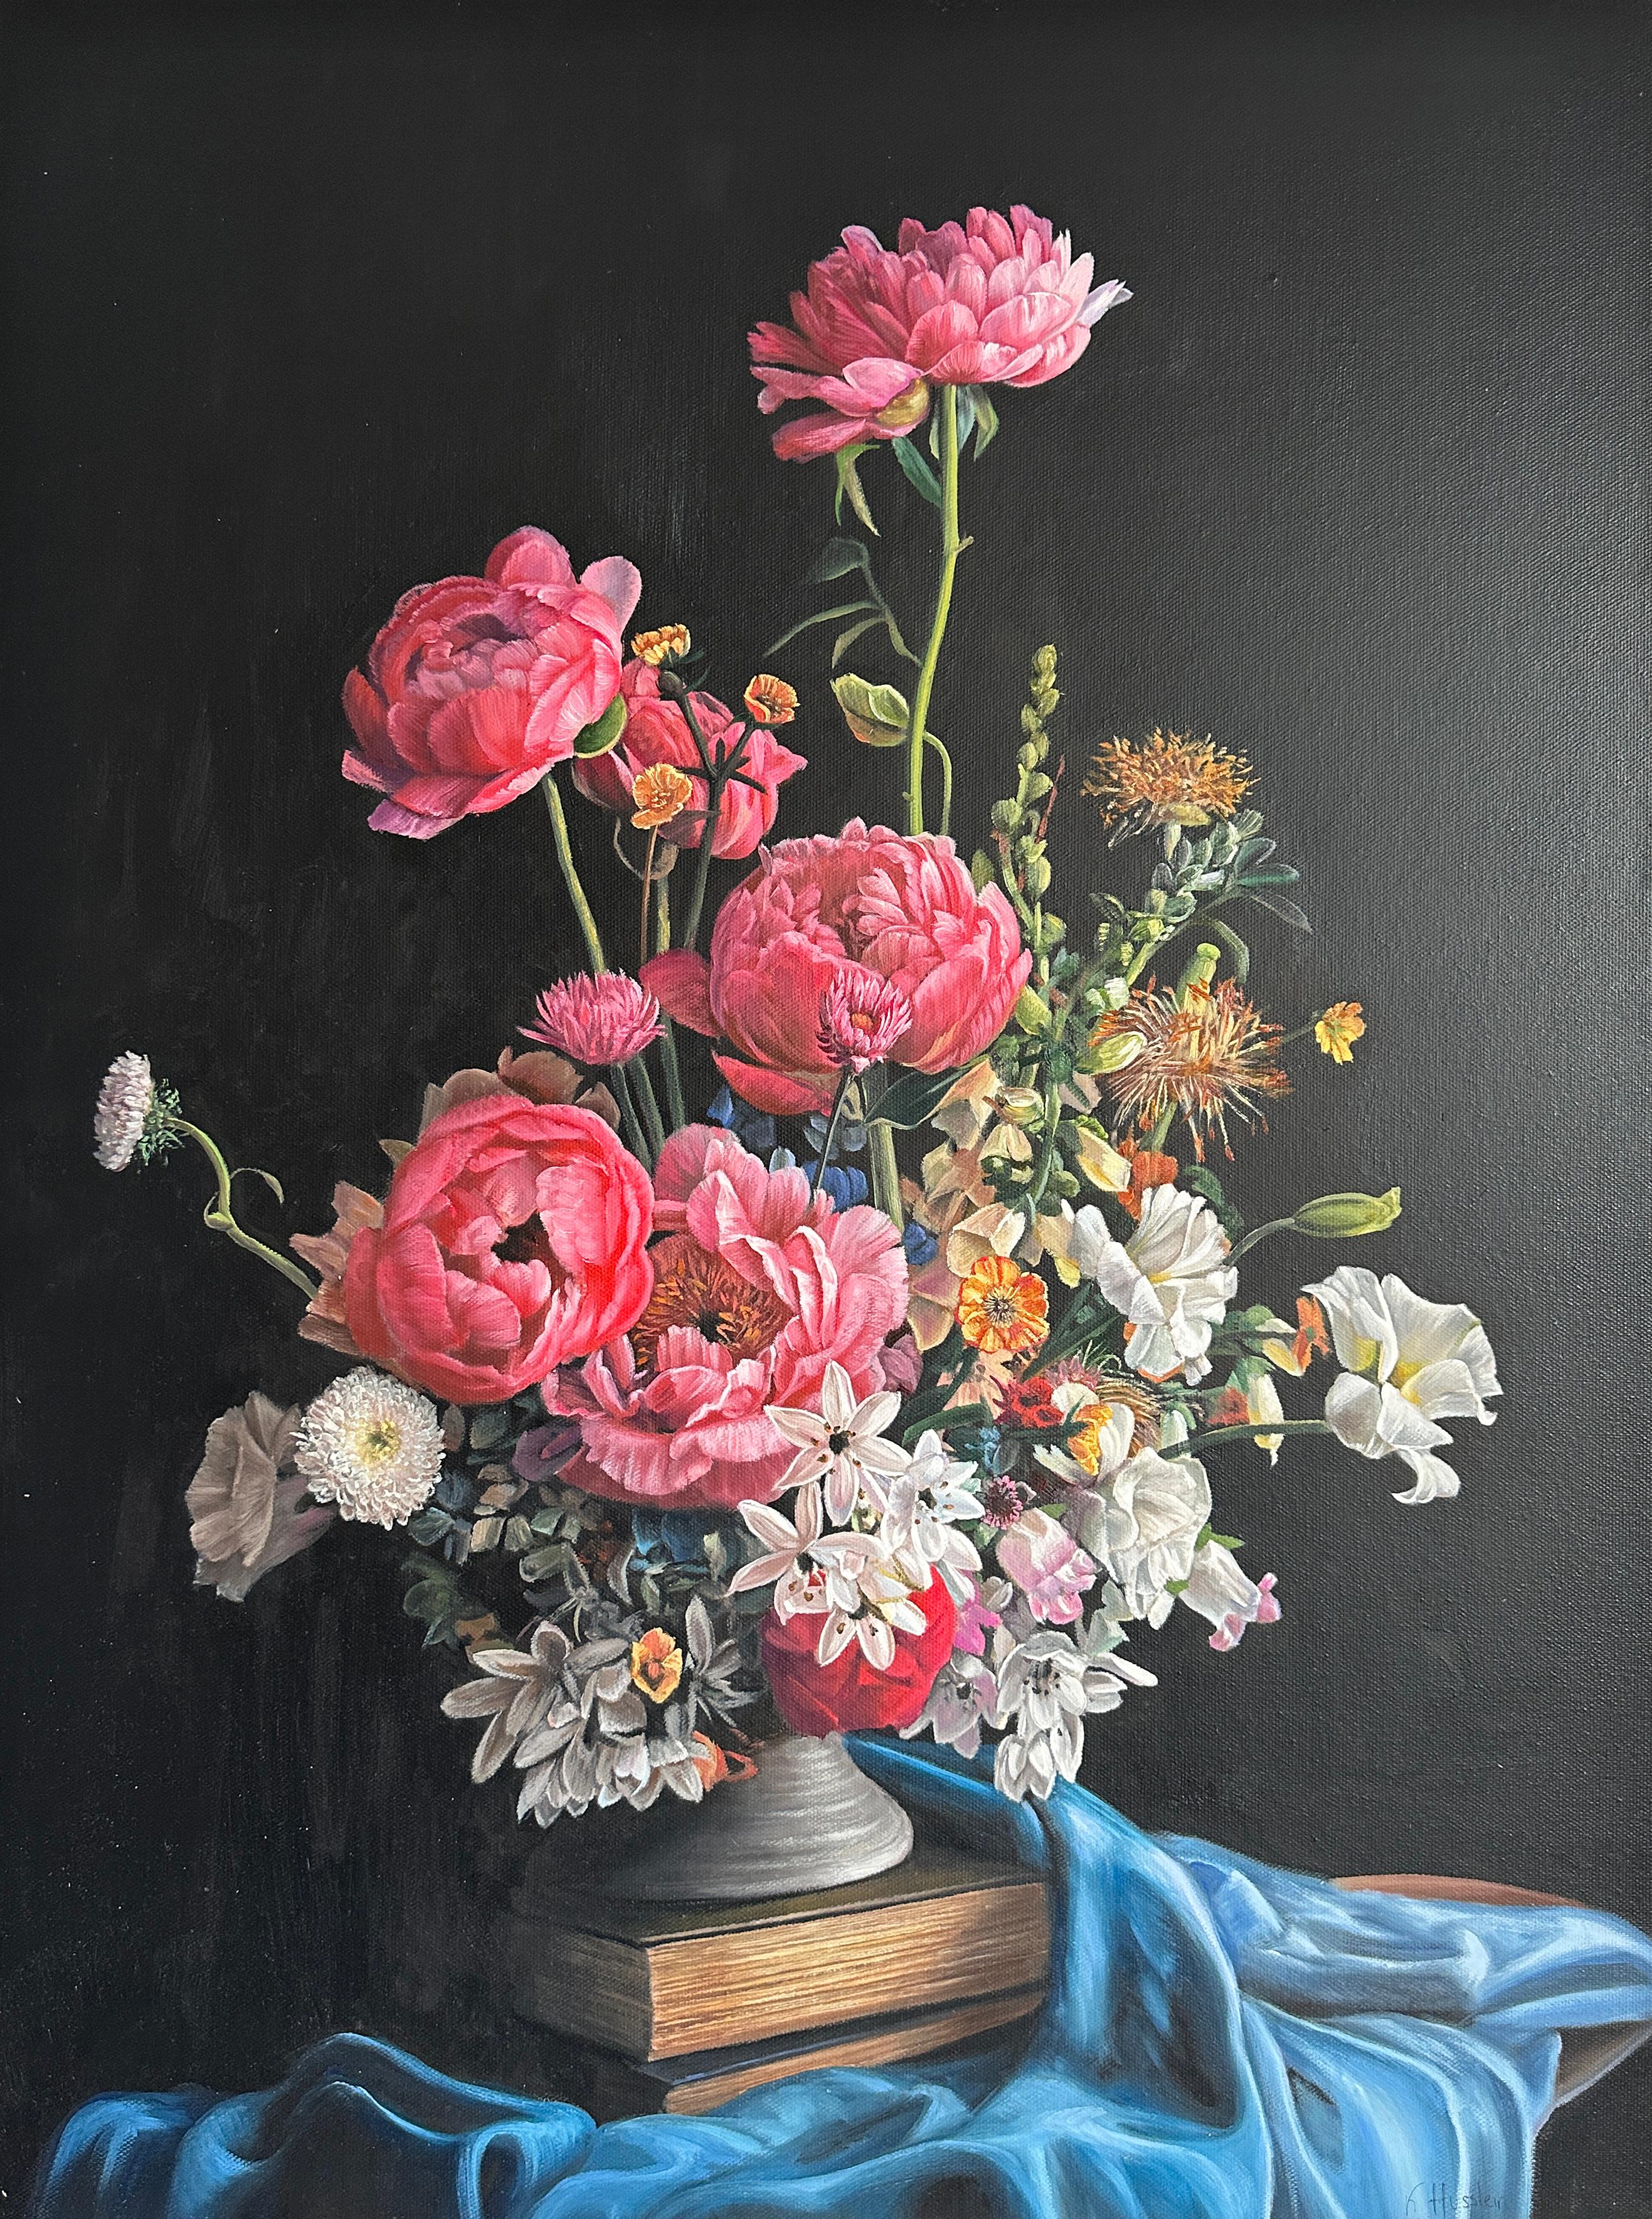 The Worship of this Love by K Husslein Botanical Hyperrealistic Still life - Painting by Katharina Husslein